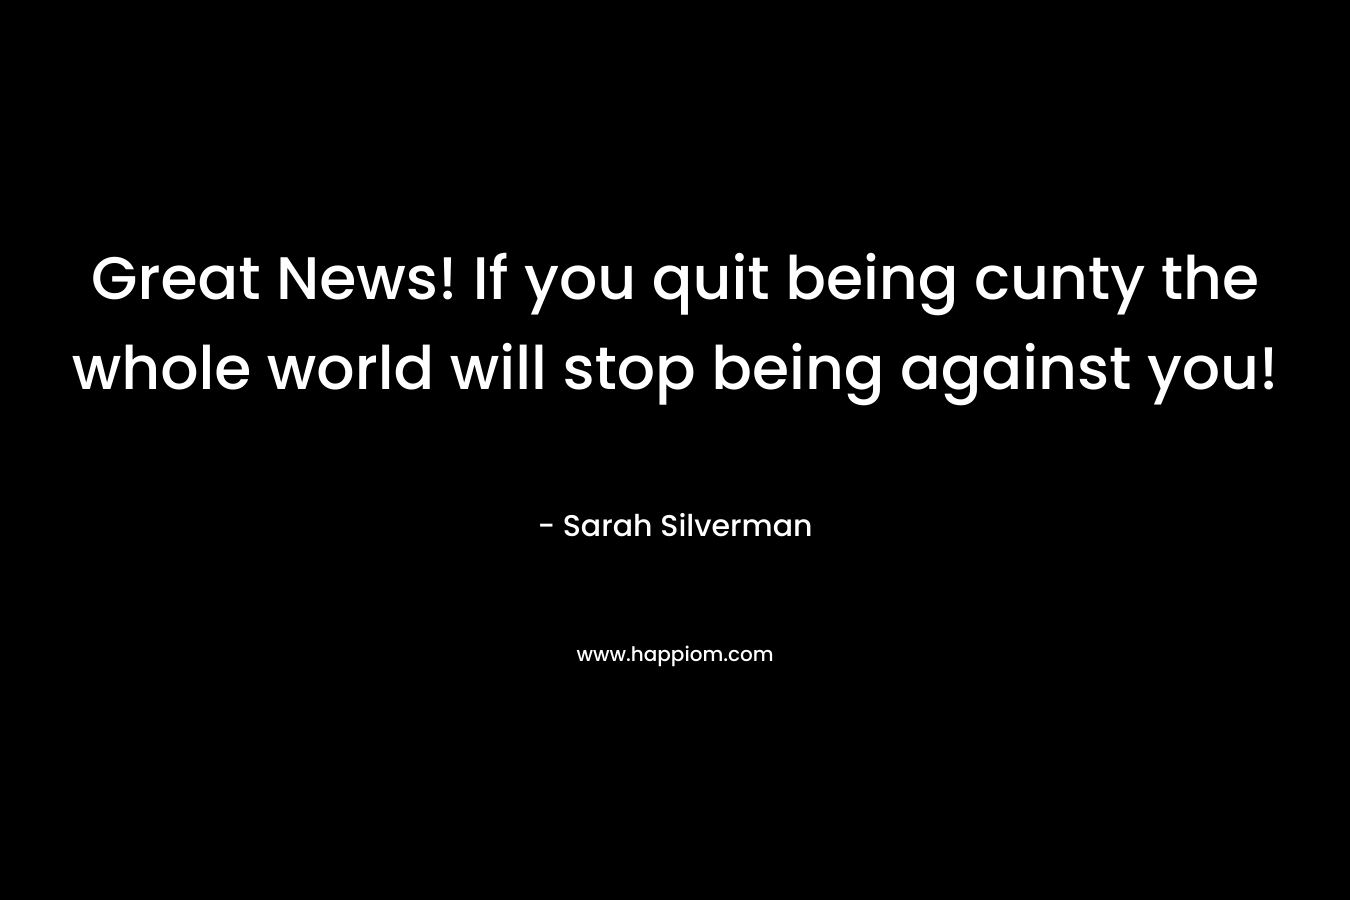 Great News! If you quit being cunty the whole world will stop being against you!